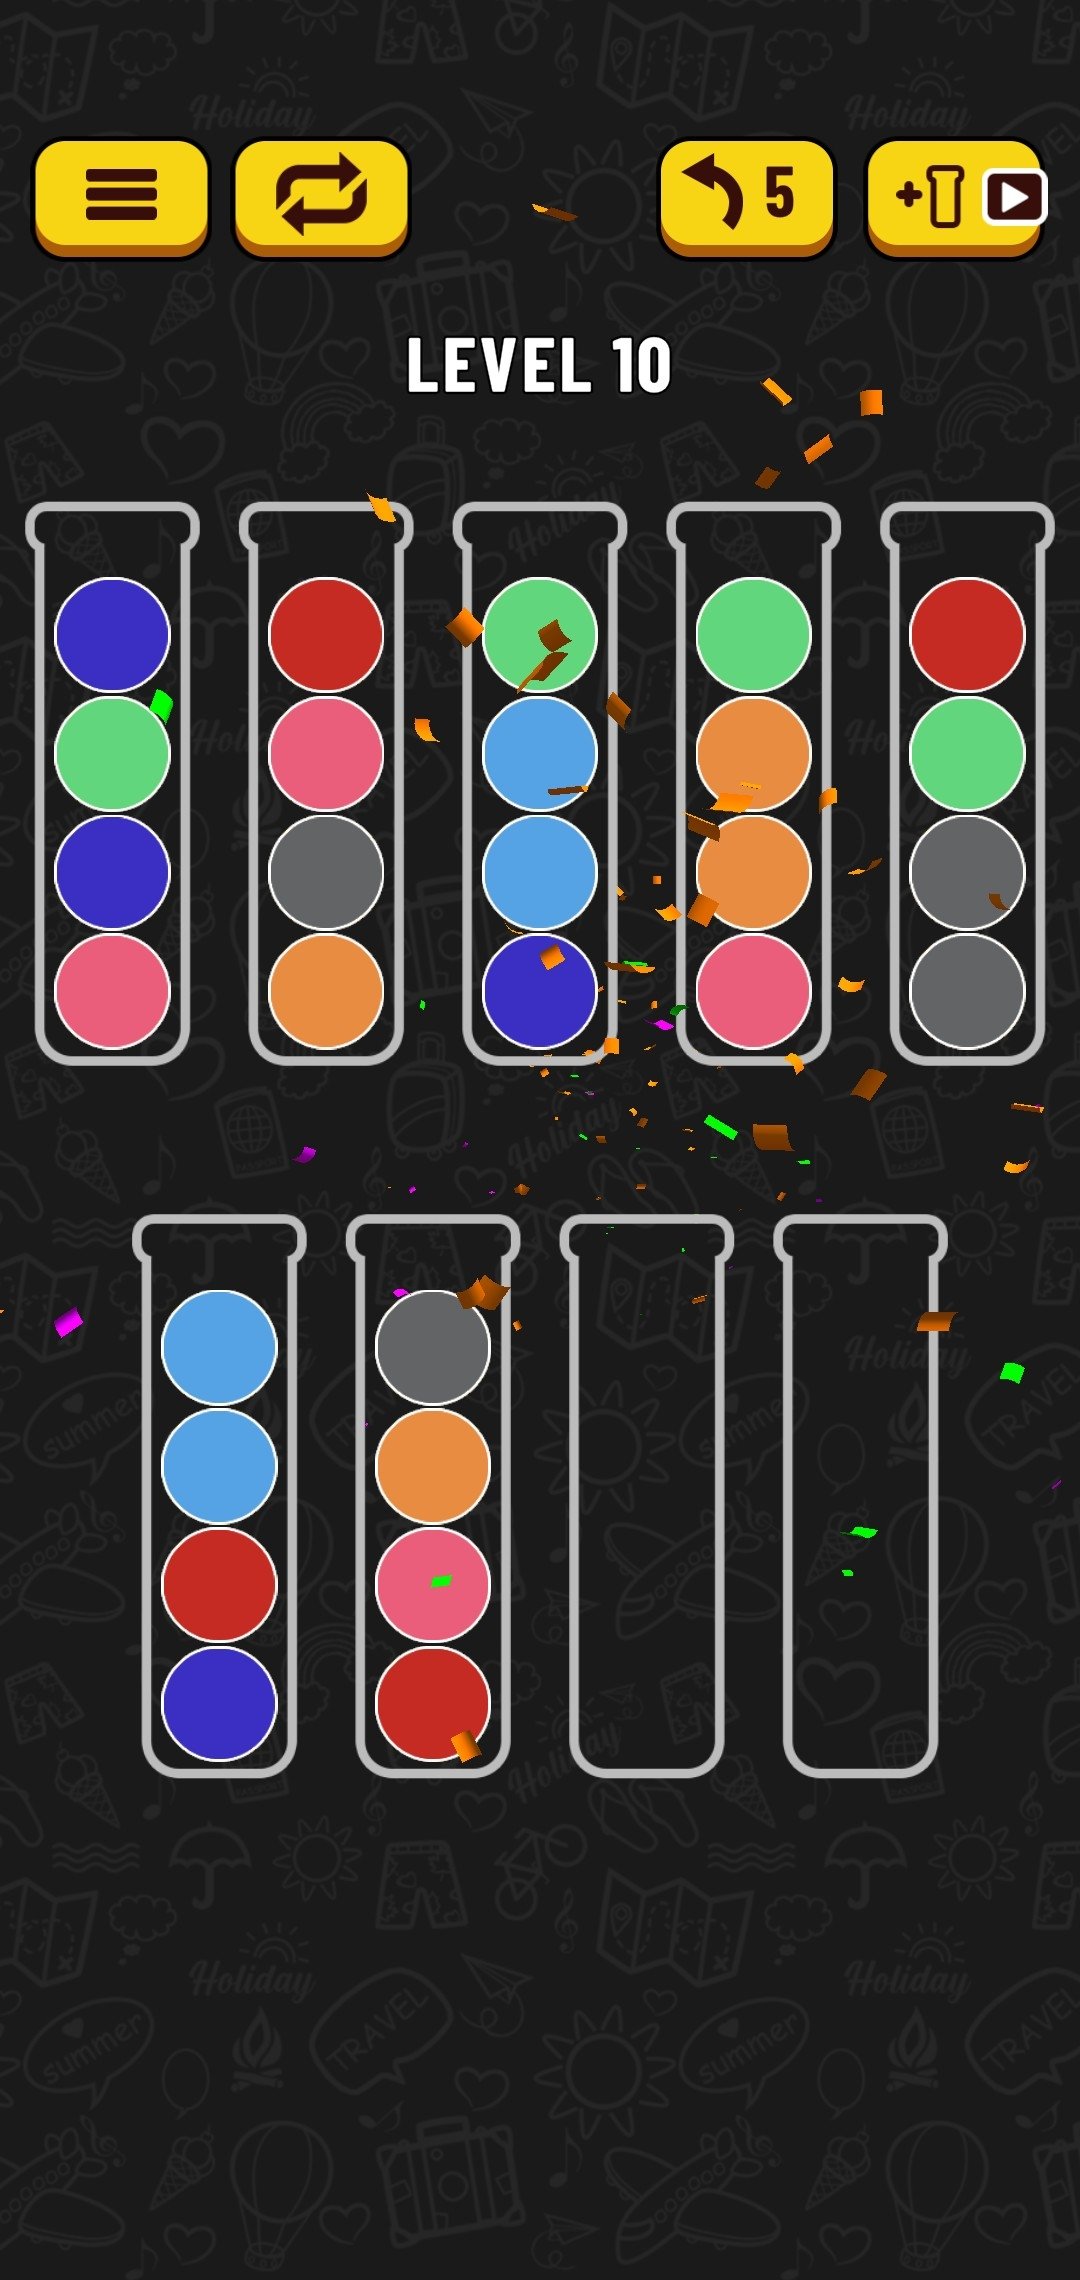 Ball Sort Puzzle Level 50 / Ball sort puzzle is a mobile game available